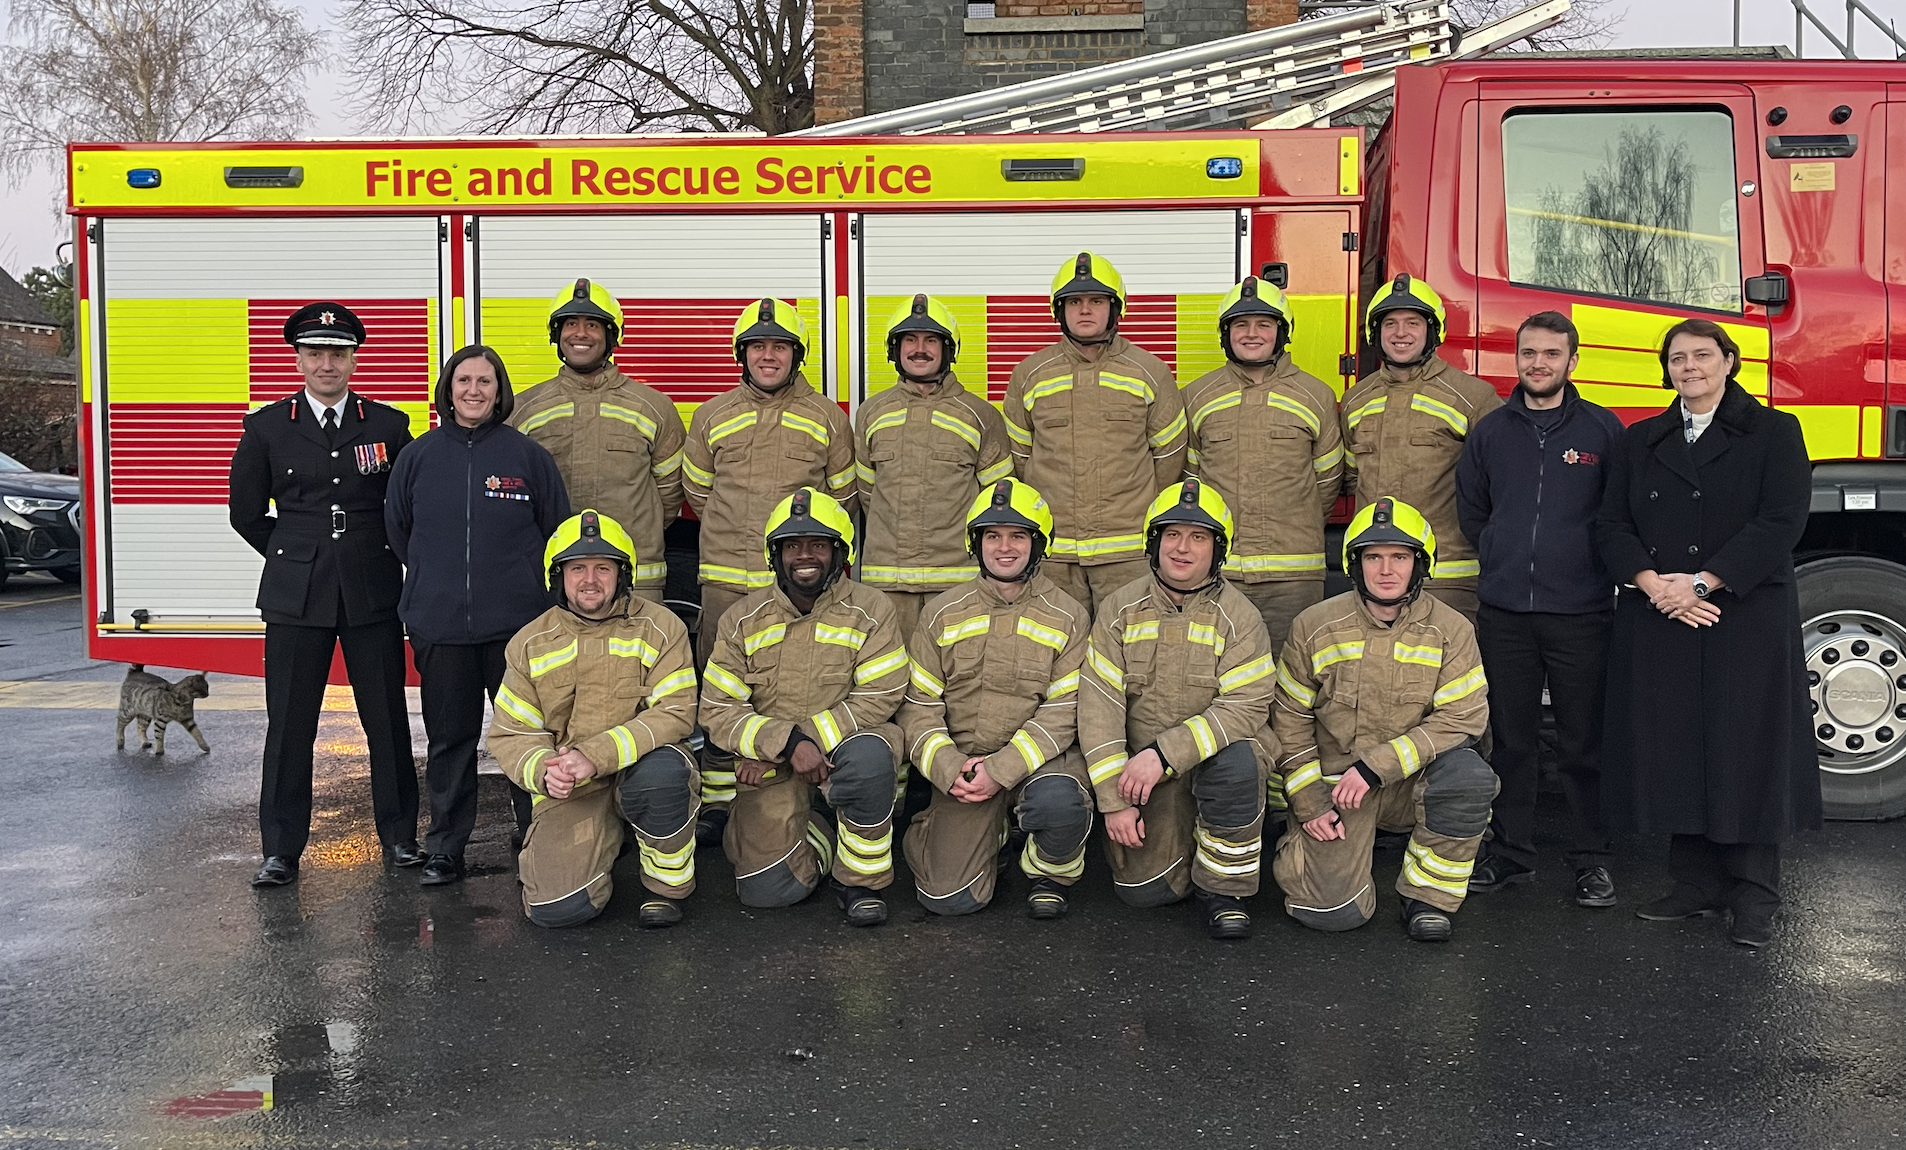 Chief Fire Officer Rick Hylton and Deputy Police, Fire and Crime Commission Jane Gardner with our new firefighters and control staff